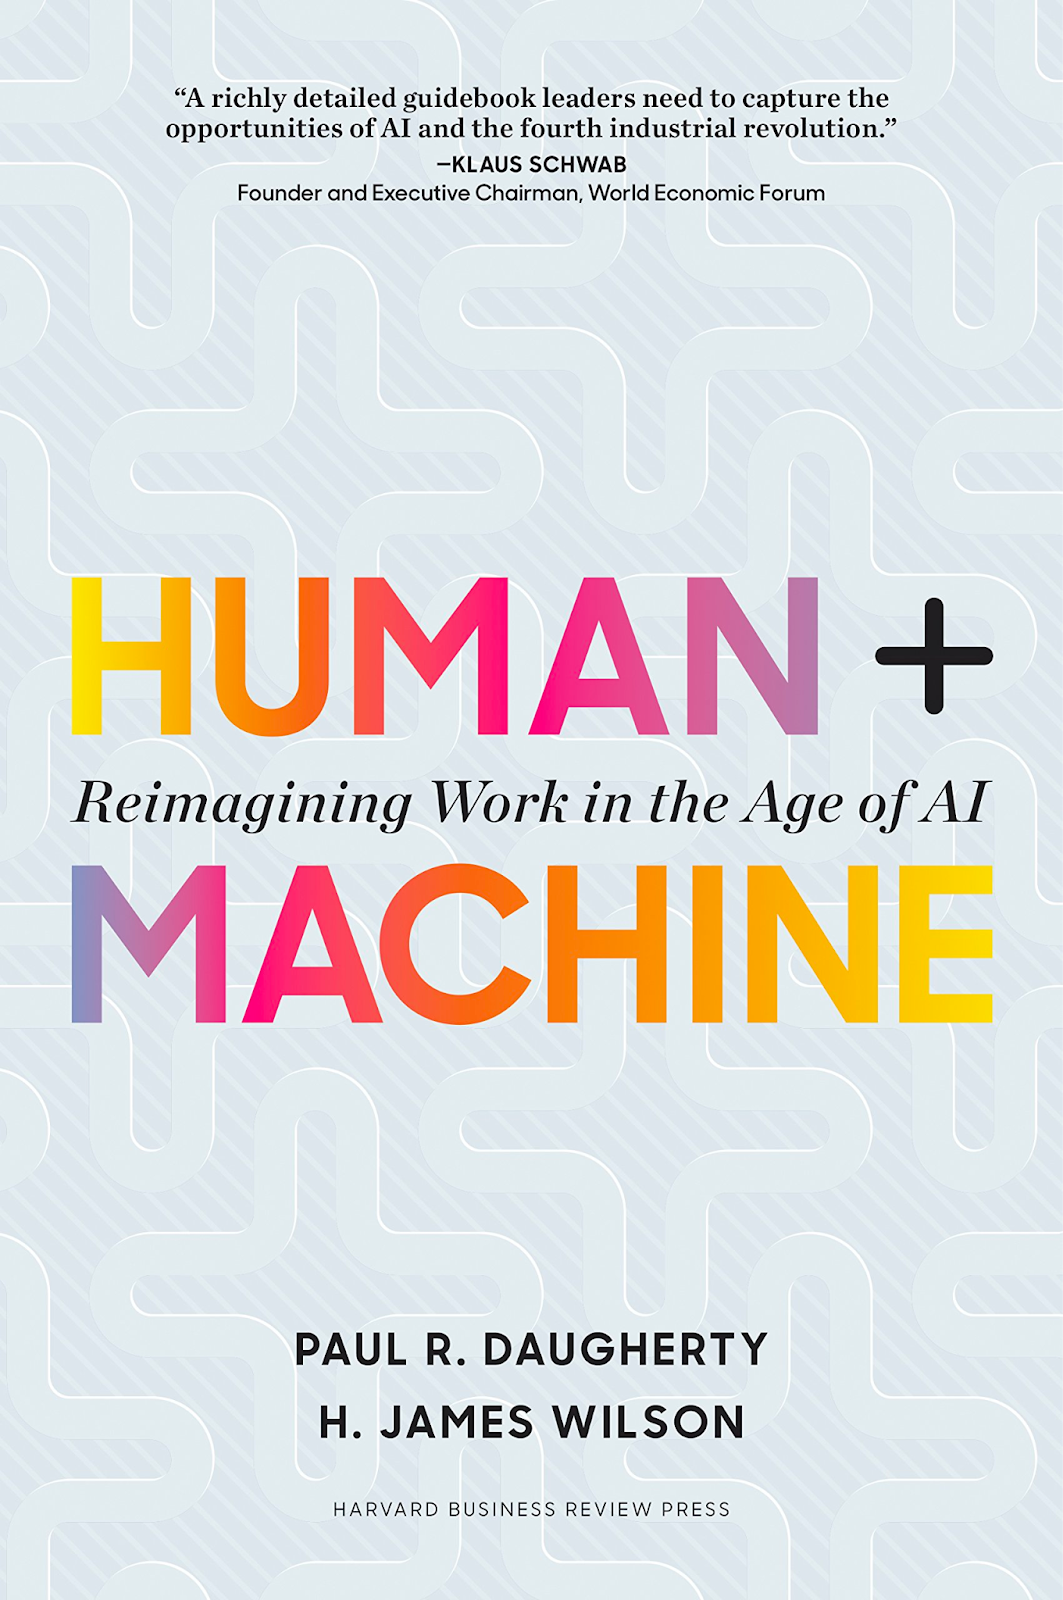 Book cover: Human + Machine: Reimagining the Work in the Age of AI by Paul R. Daugherty and H. James Wilson